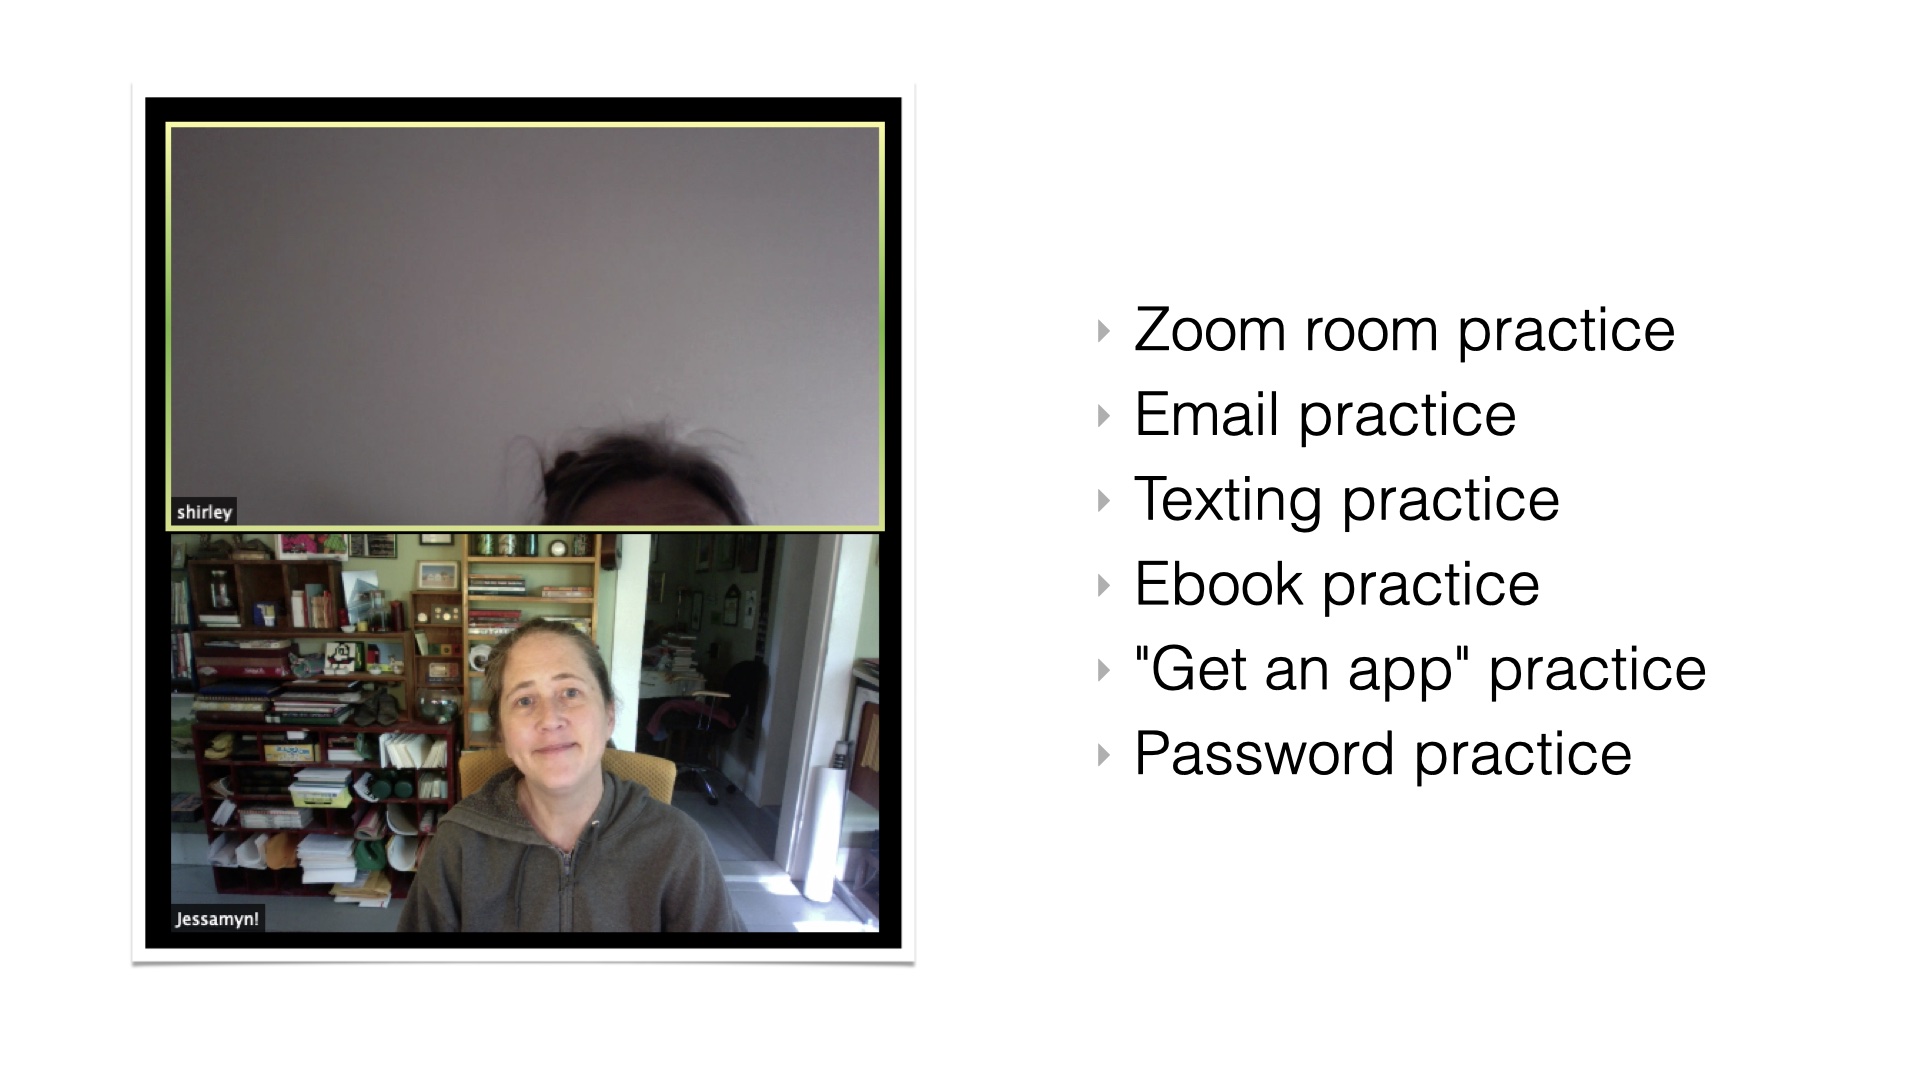 Zoom scfreenshot showing me in the lower pane and the top of Shirley's head in the top pane. Bulleted list: - Zoom room practice
- Email practice
- Texting practice
- Ebook practice
-'Get an app' practice
- Password practice